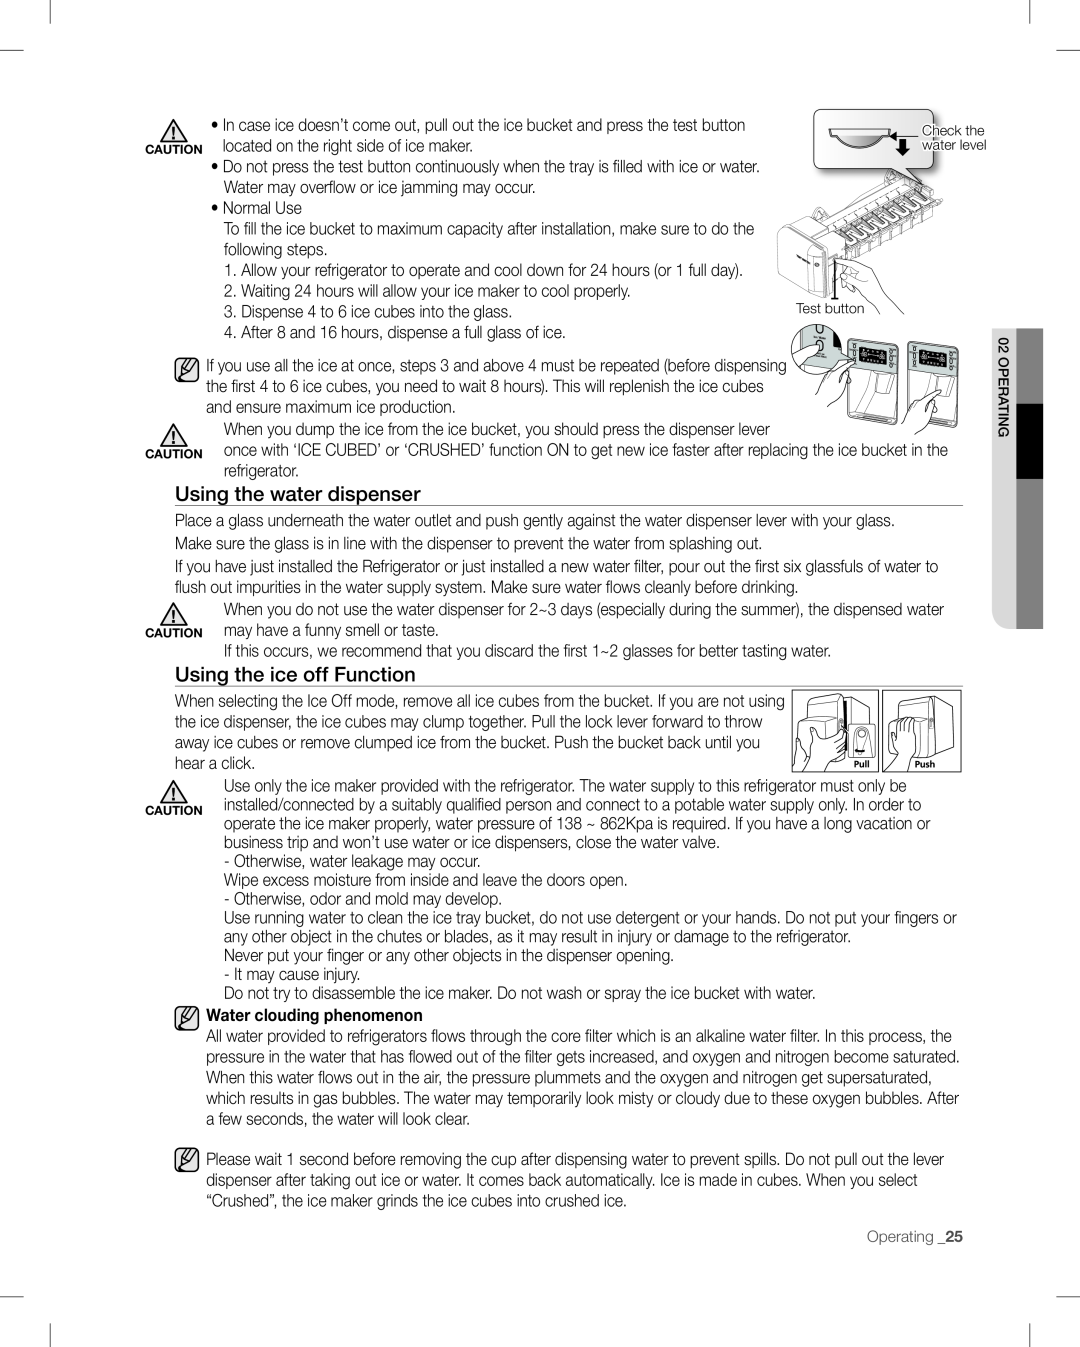 Samsung RF268AB user manual Using the water dispenser, Using the ice off Function, Water clouding phenomenon 